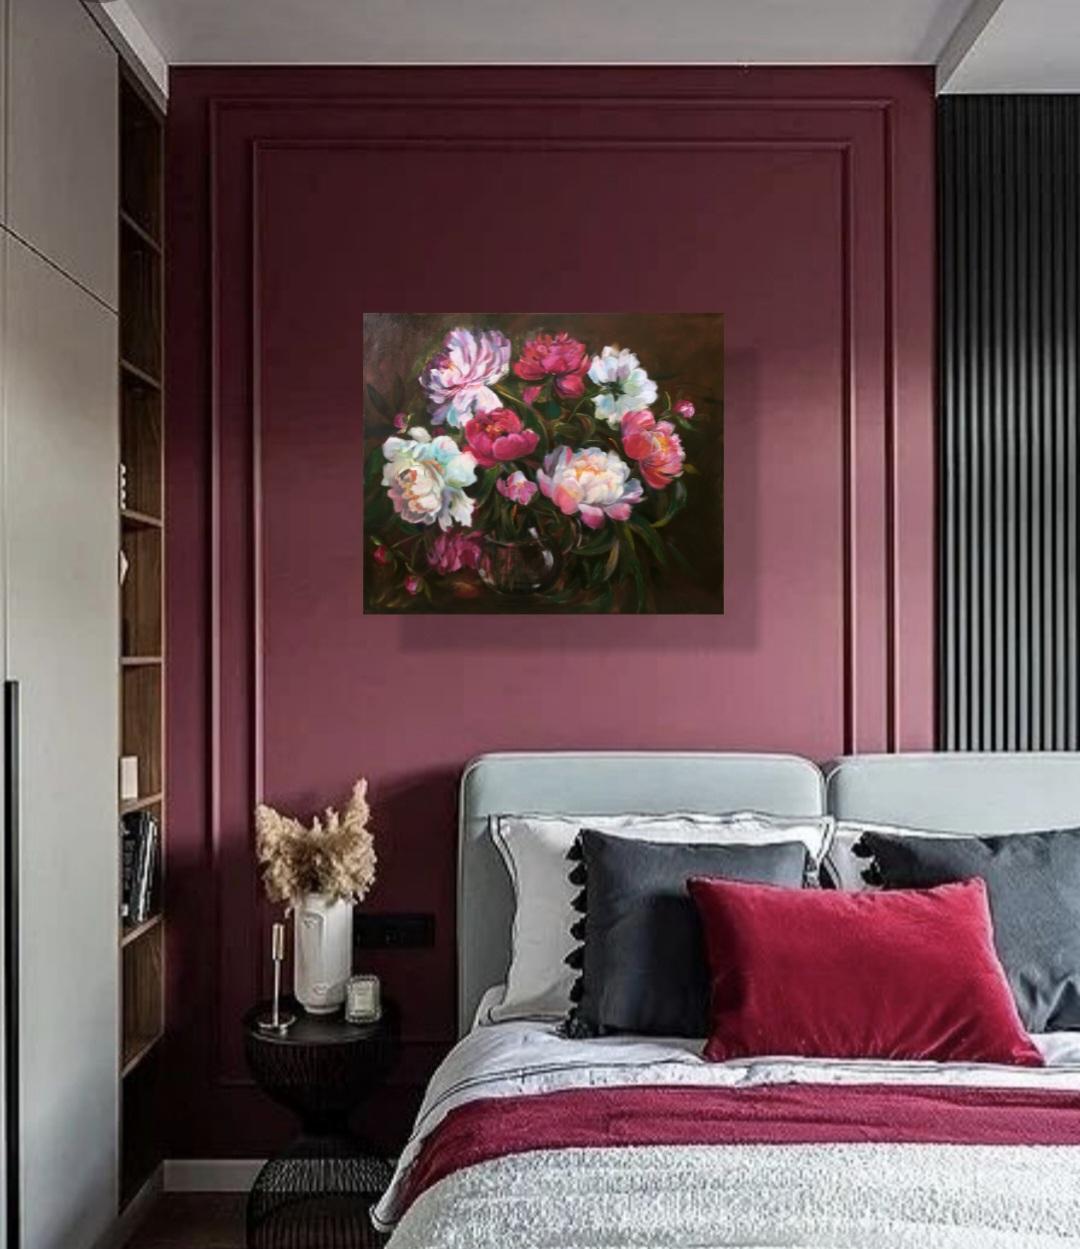 Red and white peonies in the style of Dutch masters - Realist Painting by Lilya Volskaya